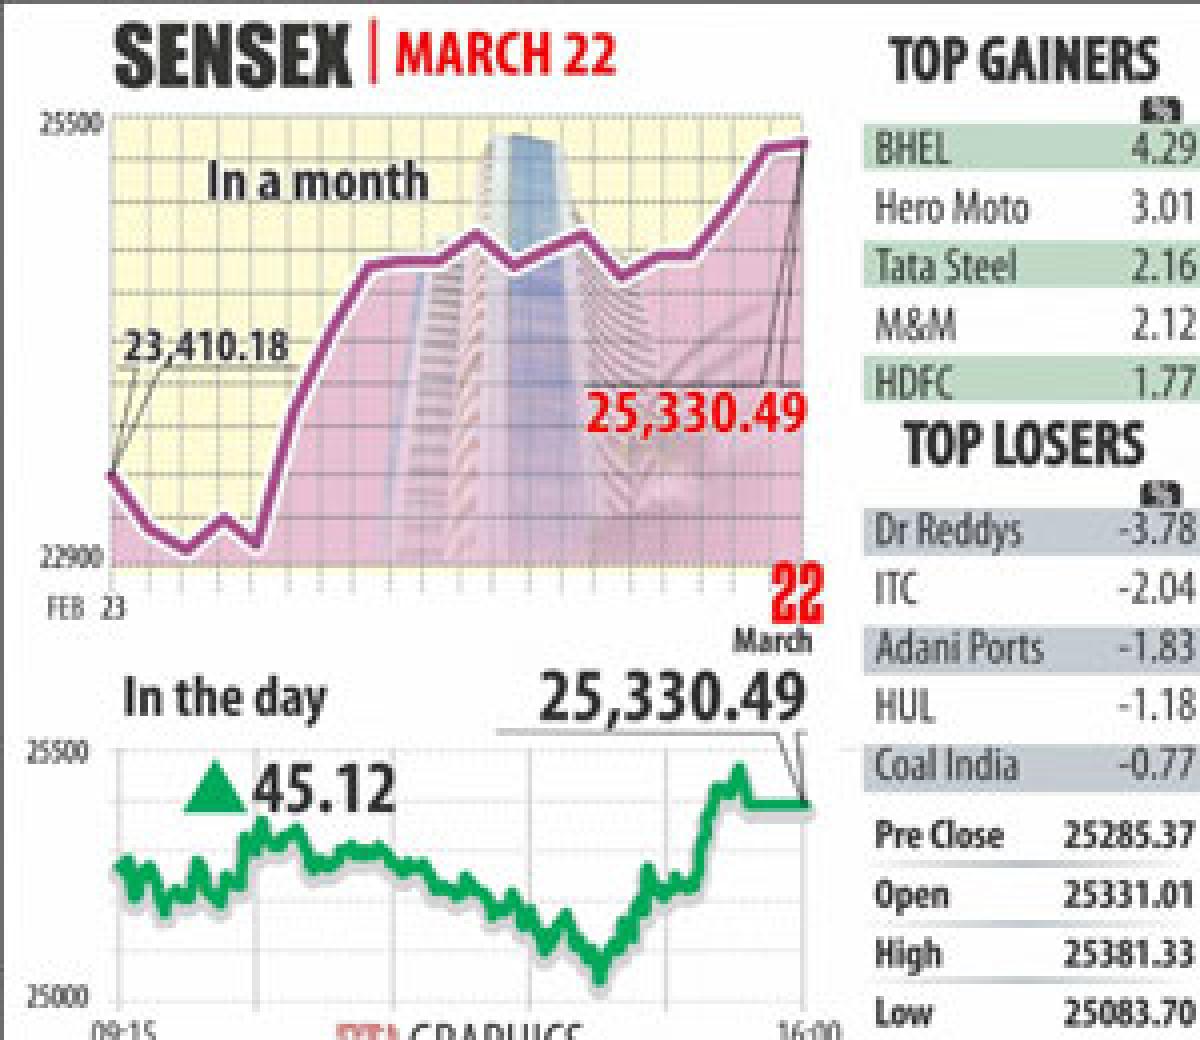 Sensex climbs for third day Brussels attacks keep lid on gains